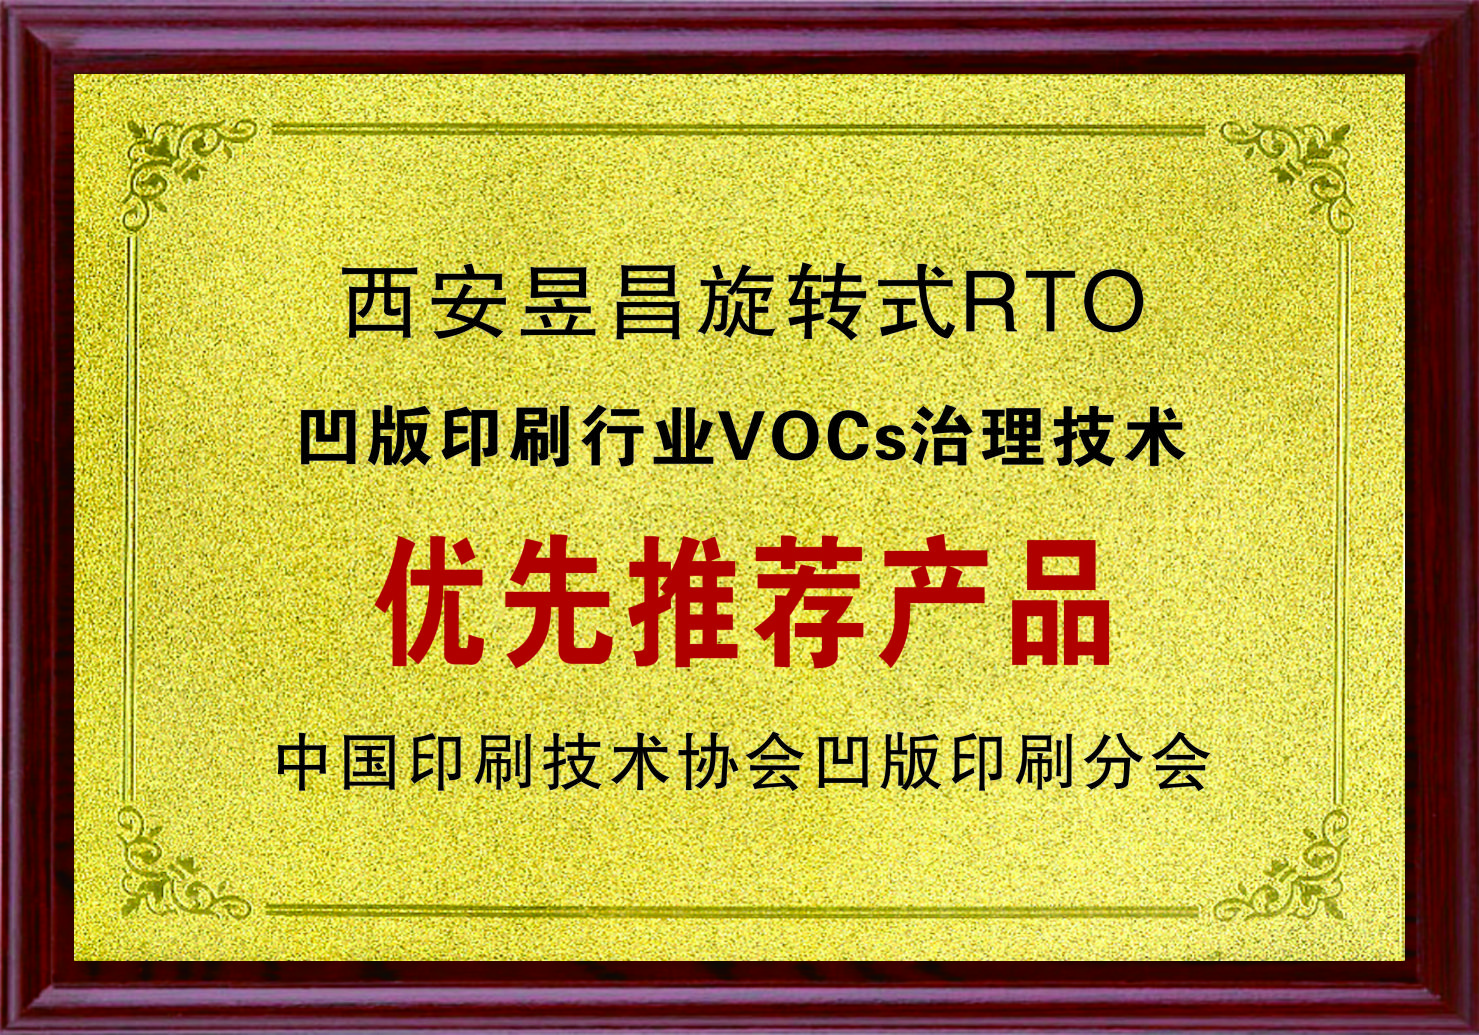 VOCs management technology in gravure printing industry gives priority to recommended products